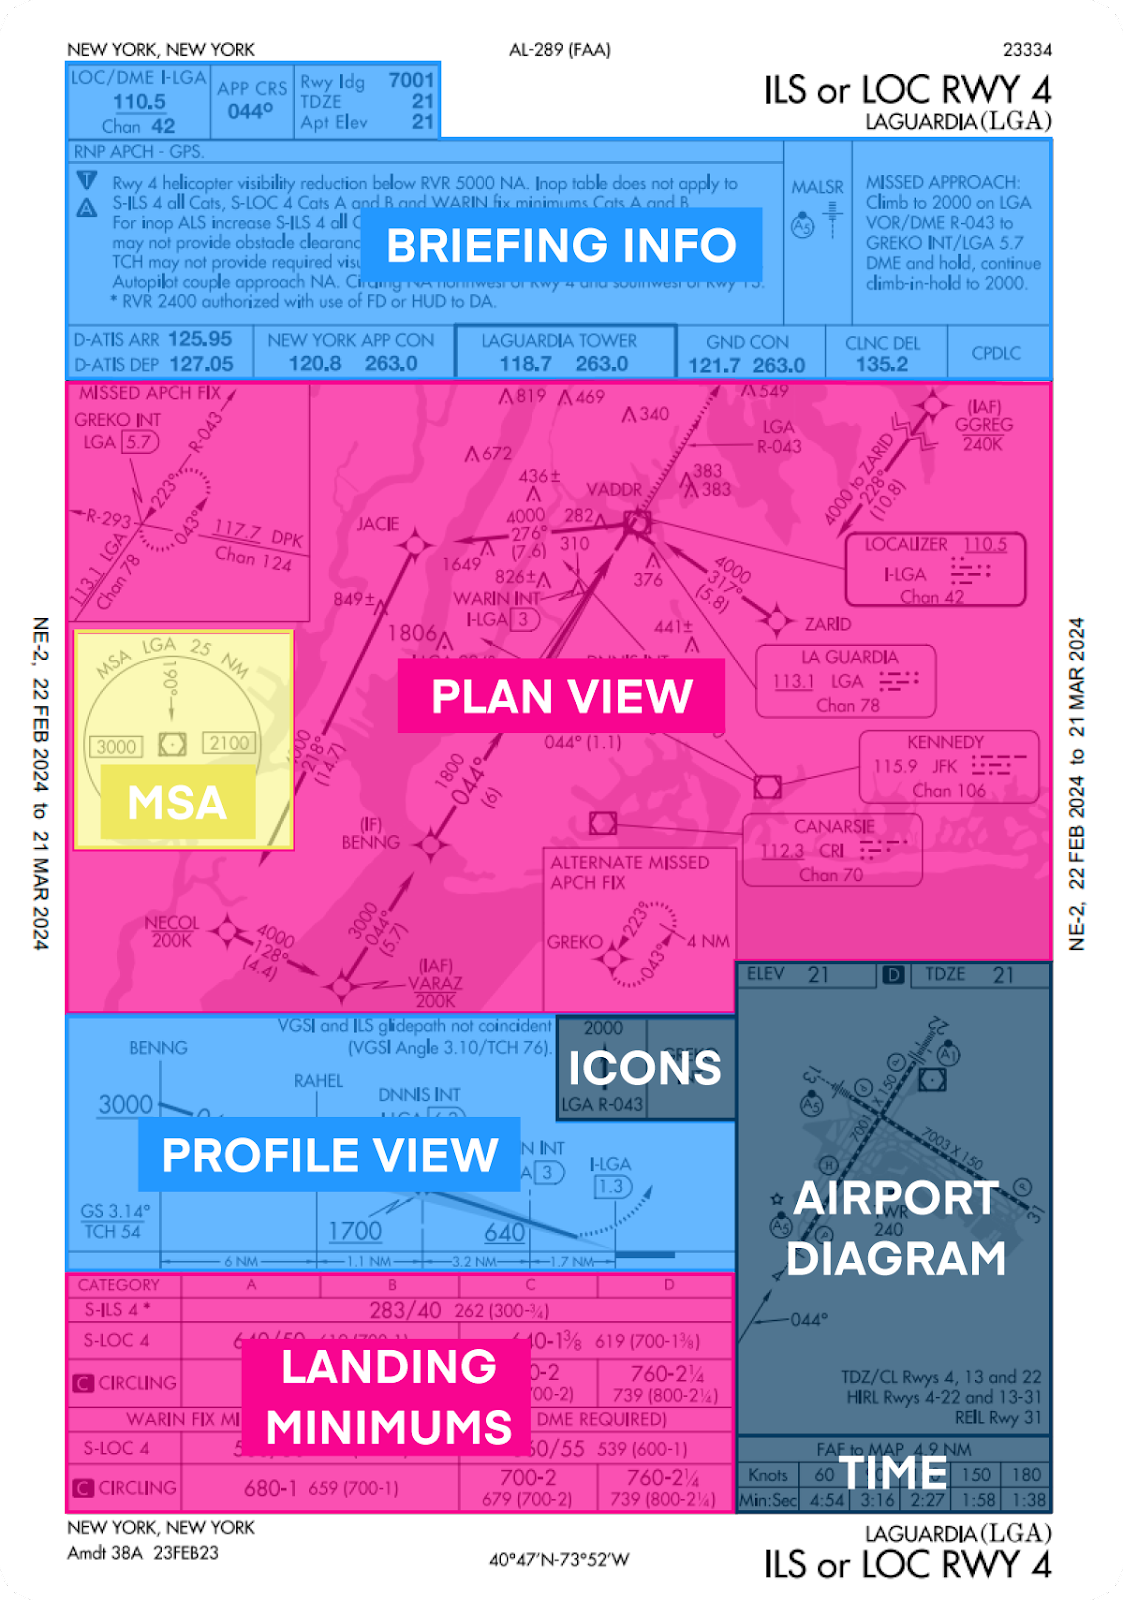 Overview of FAA approach chart.